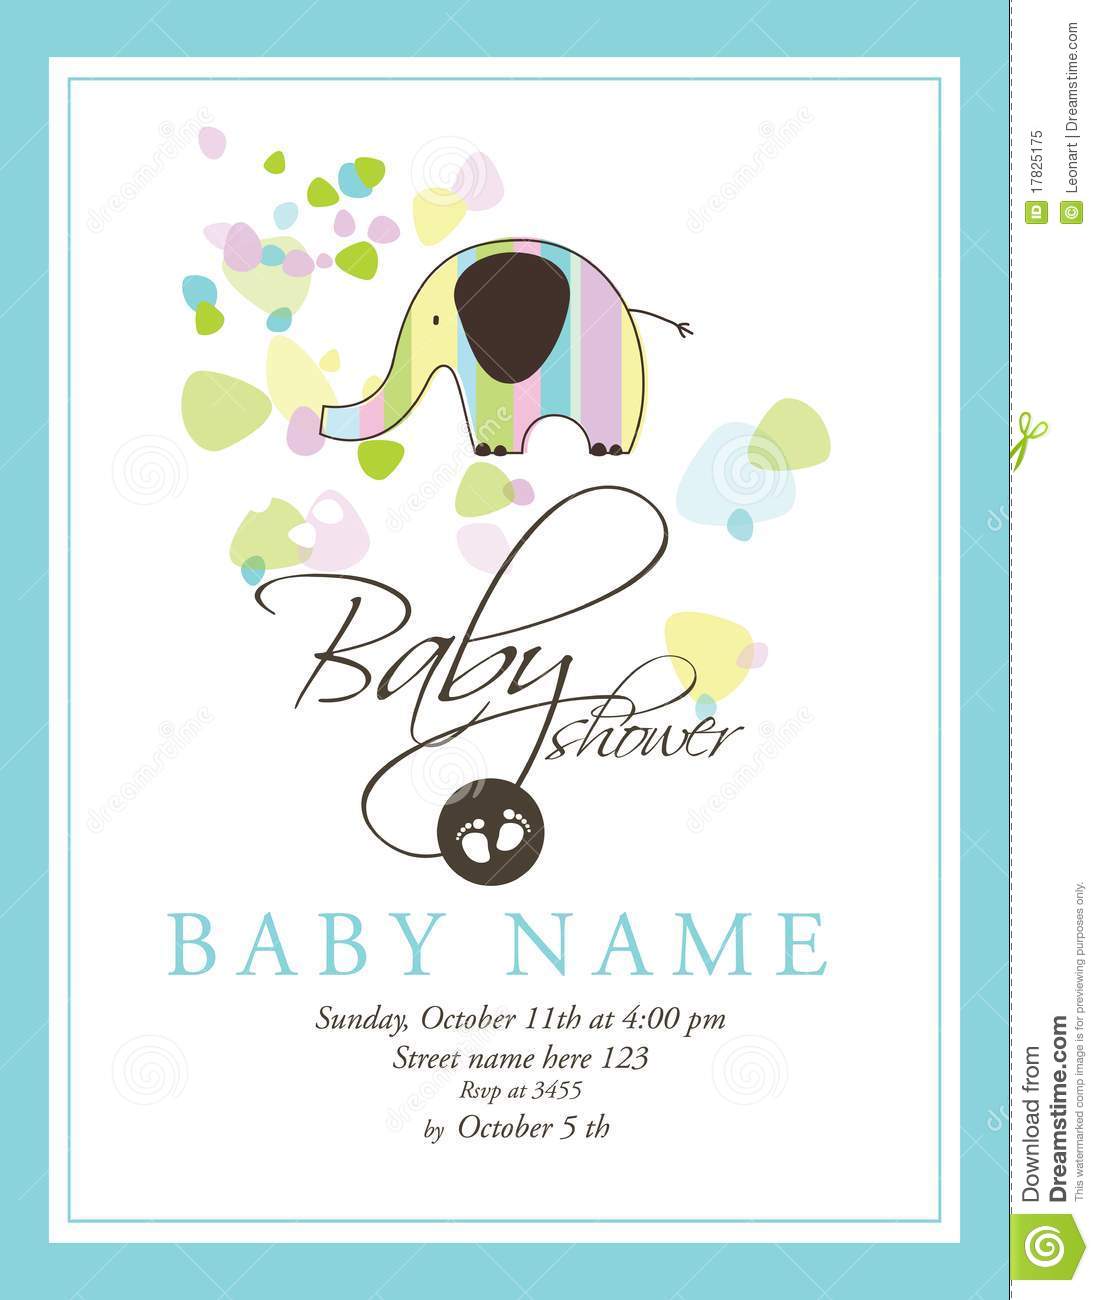 Full Size of Baby Shower:graceful Baby Shower Cards Image Designs Baby Shower Cards Or Baby Shower Gifts With Modern Baby Shower Themes Plus Cheap Baby Shower Together With Baby Shower Games As Well As Baby Shower Games For Men And Elegant Baby Shower